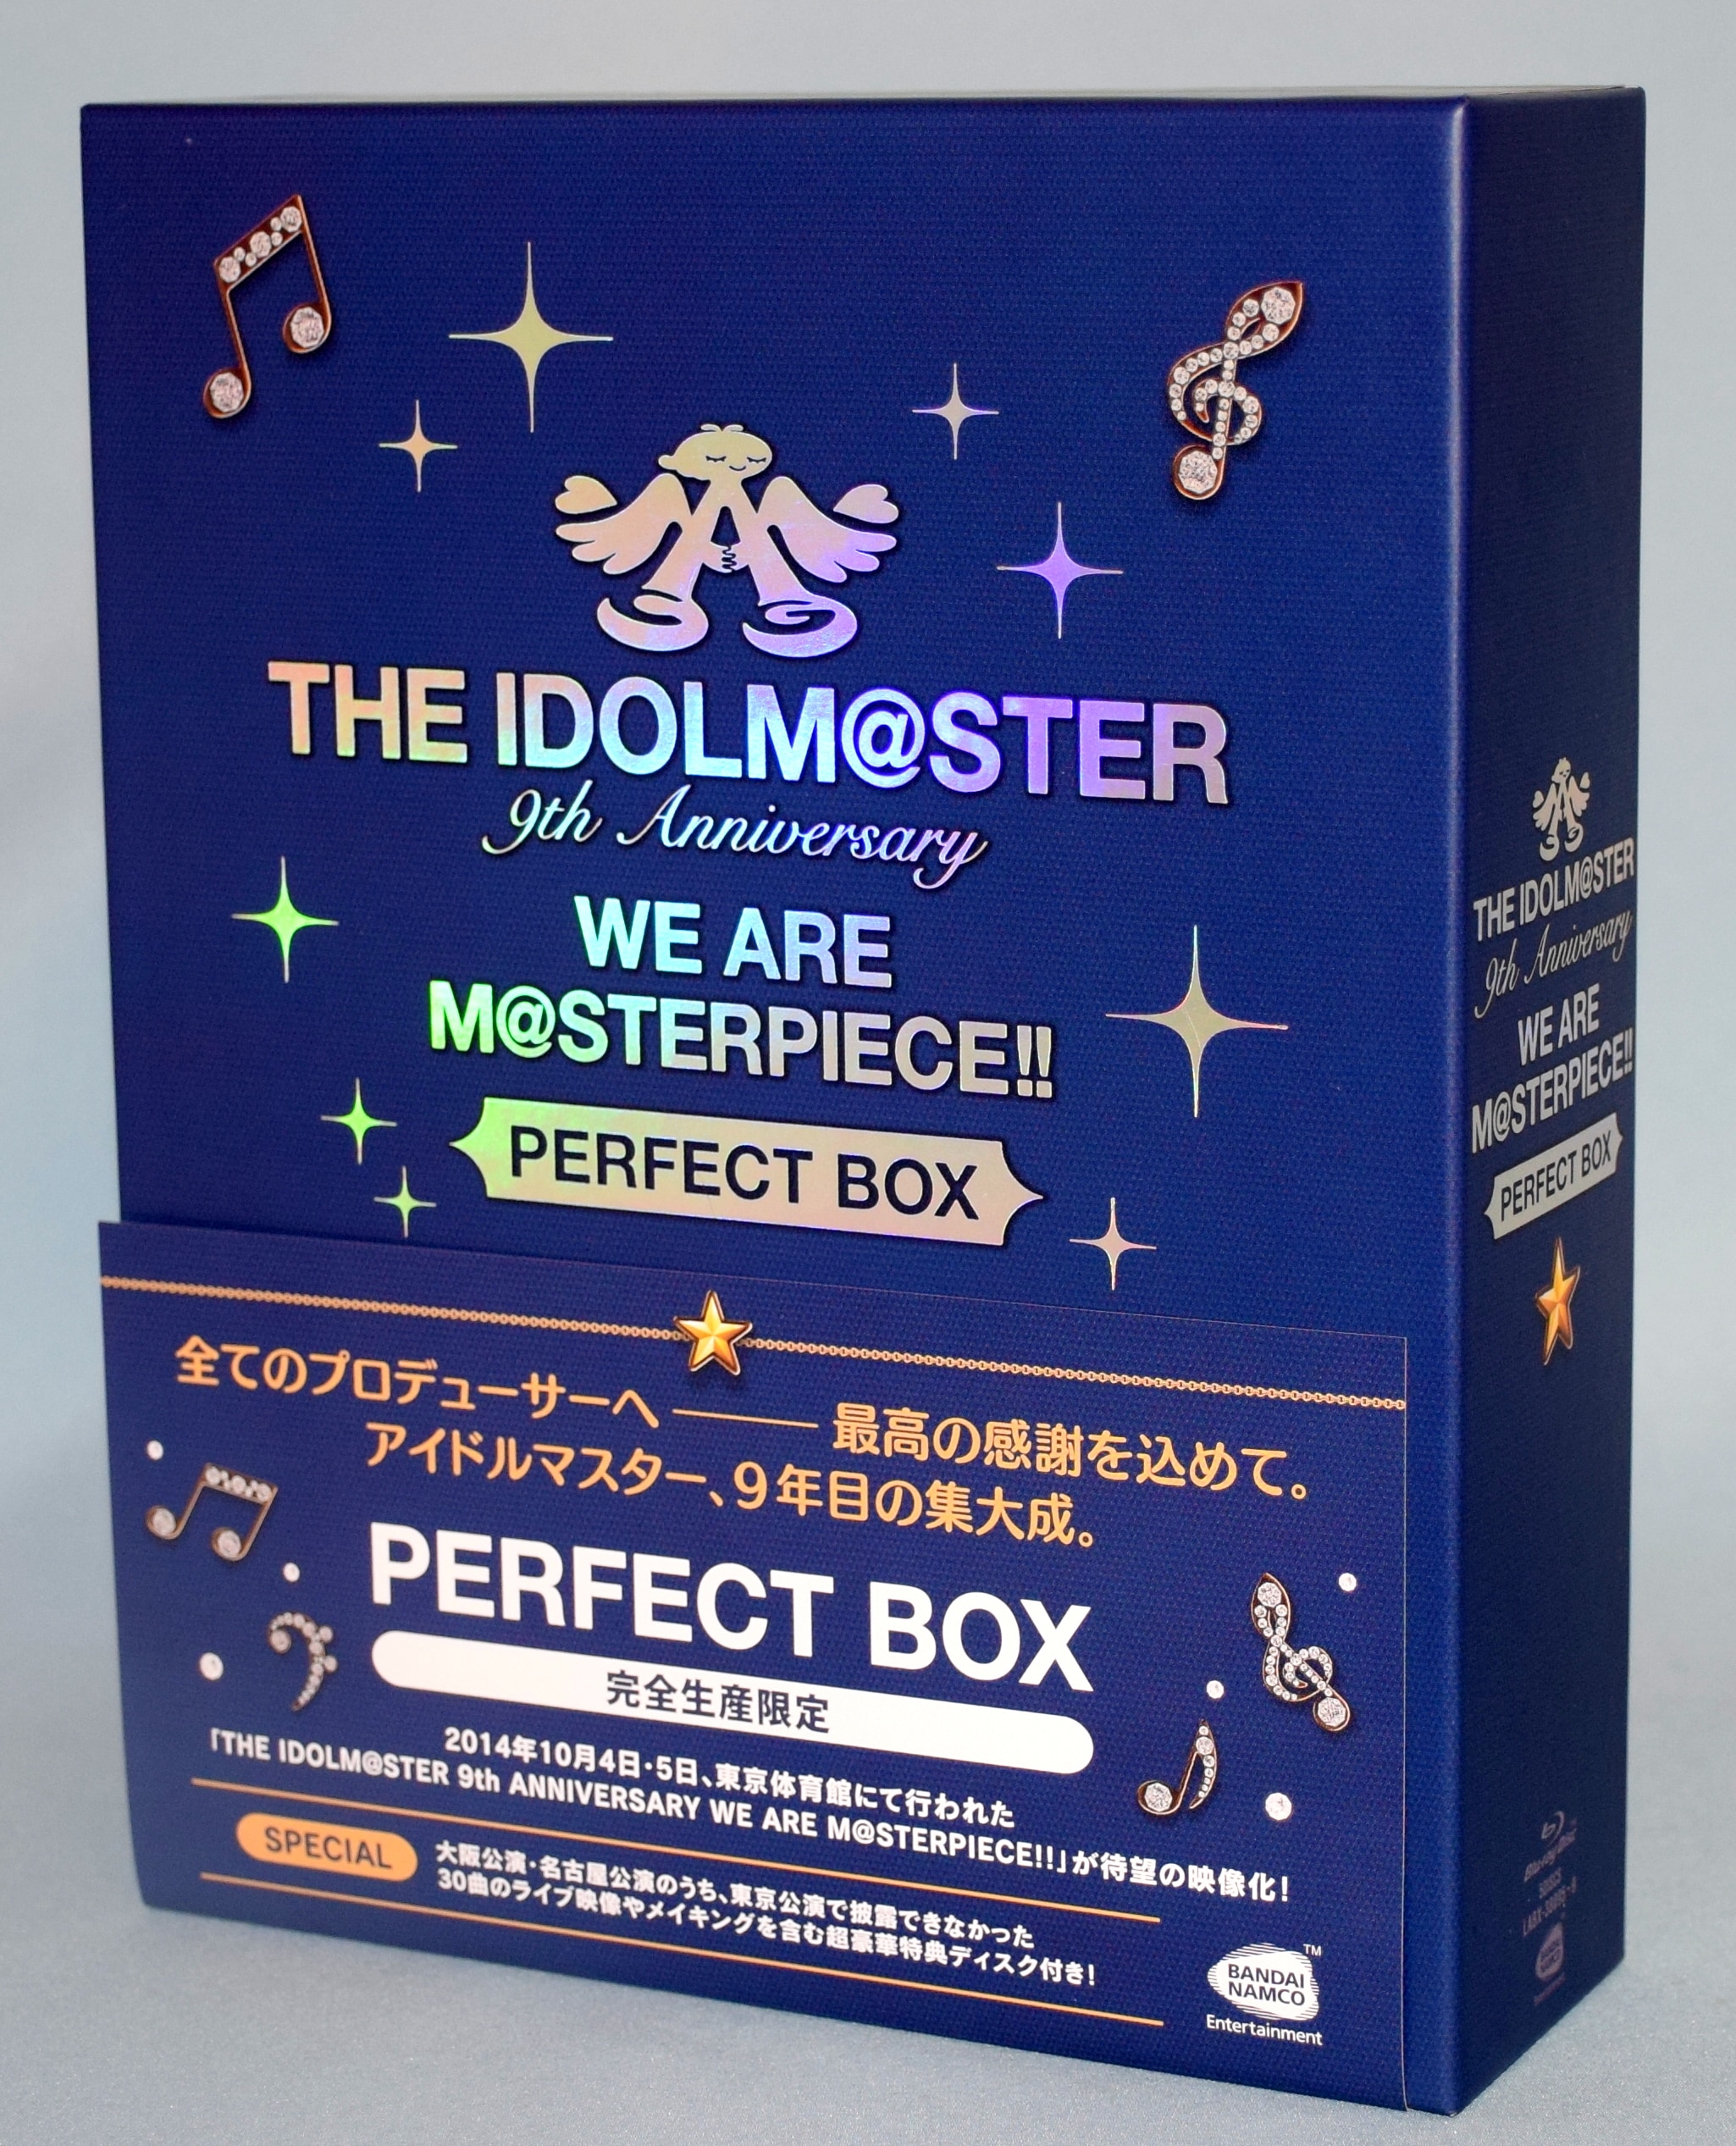 THE IDOLM @ STER 9th ANNIVERSARY WE ARE M @ STERPIECE !! PERFECT